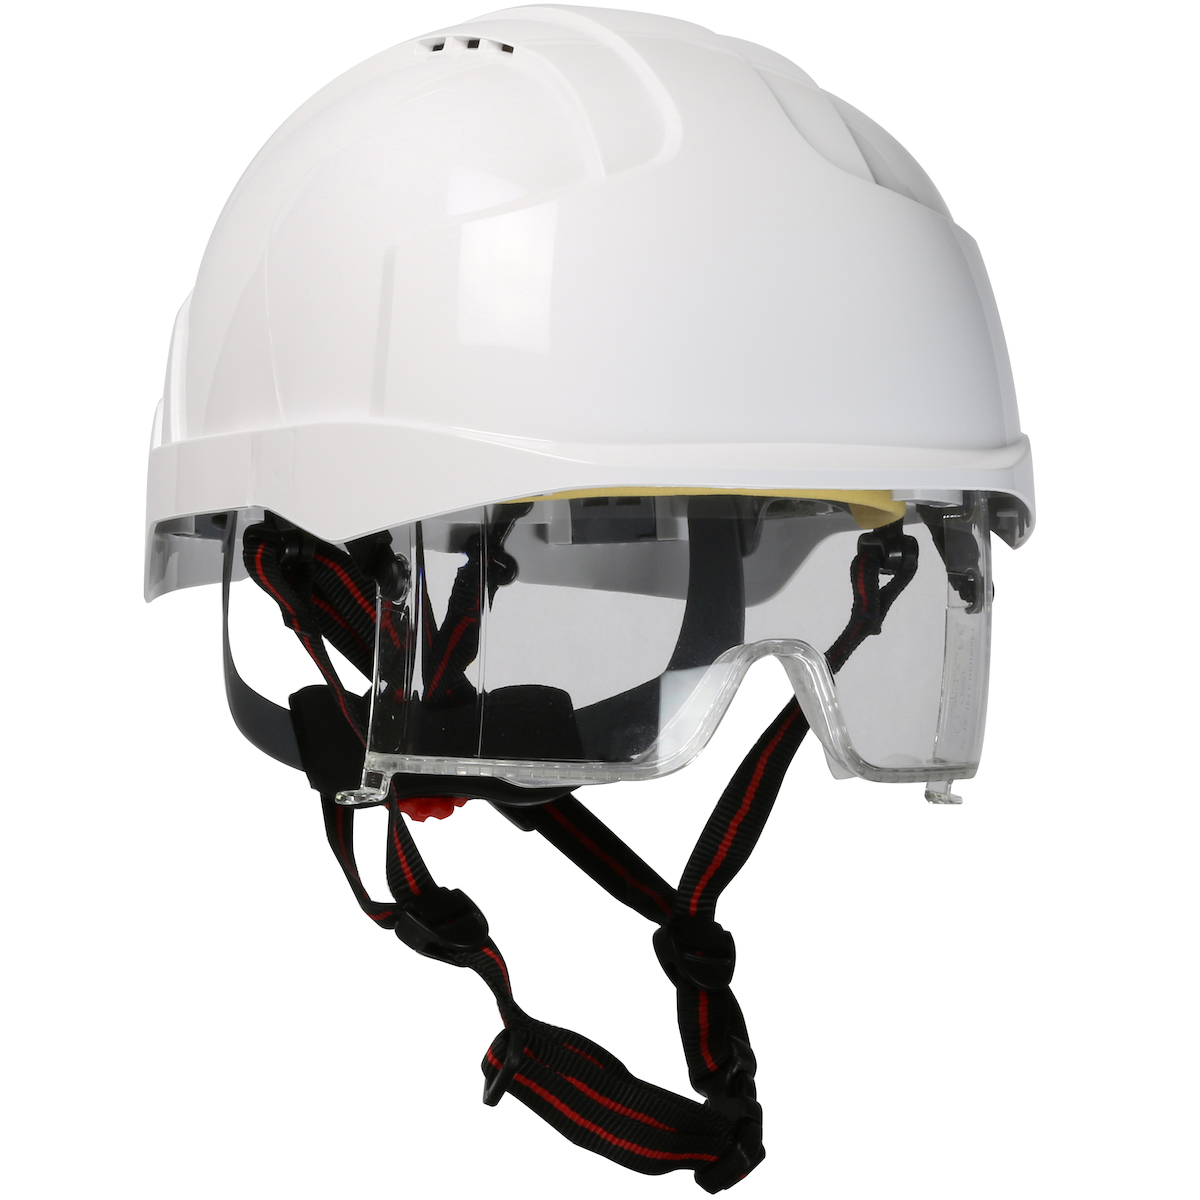 TYPE I, VENTED INDUSTRIAL SAFETY HELMET WITH FULLY ADJUSTABLE FOUR POINT CHINSTRAP, LIGHTWEIGHT ABS SHELL, INTEGRATED ANSI Z87.1 EYE PROTECTION, 6-POINT POLYESTER SUSPENSION AND WHEEL RATCHET ADJUSTMENT